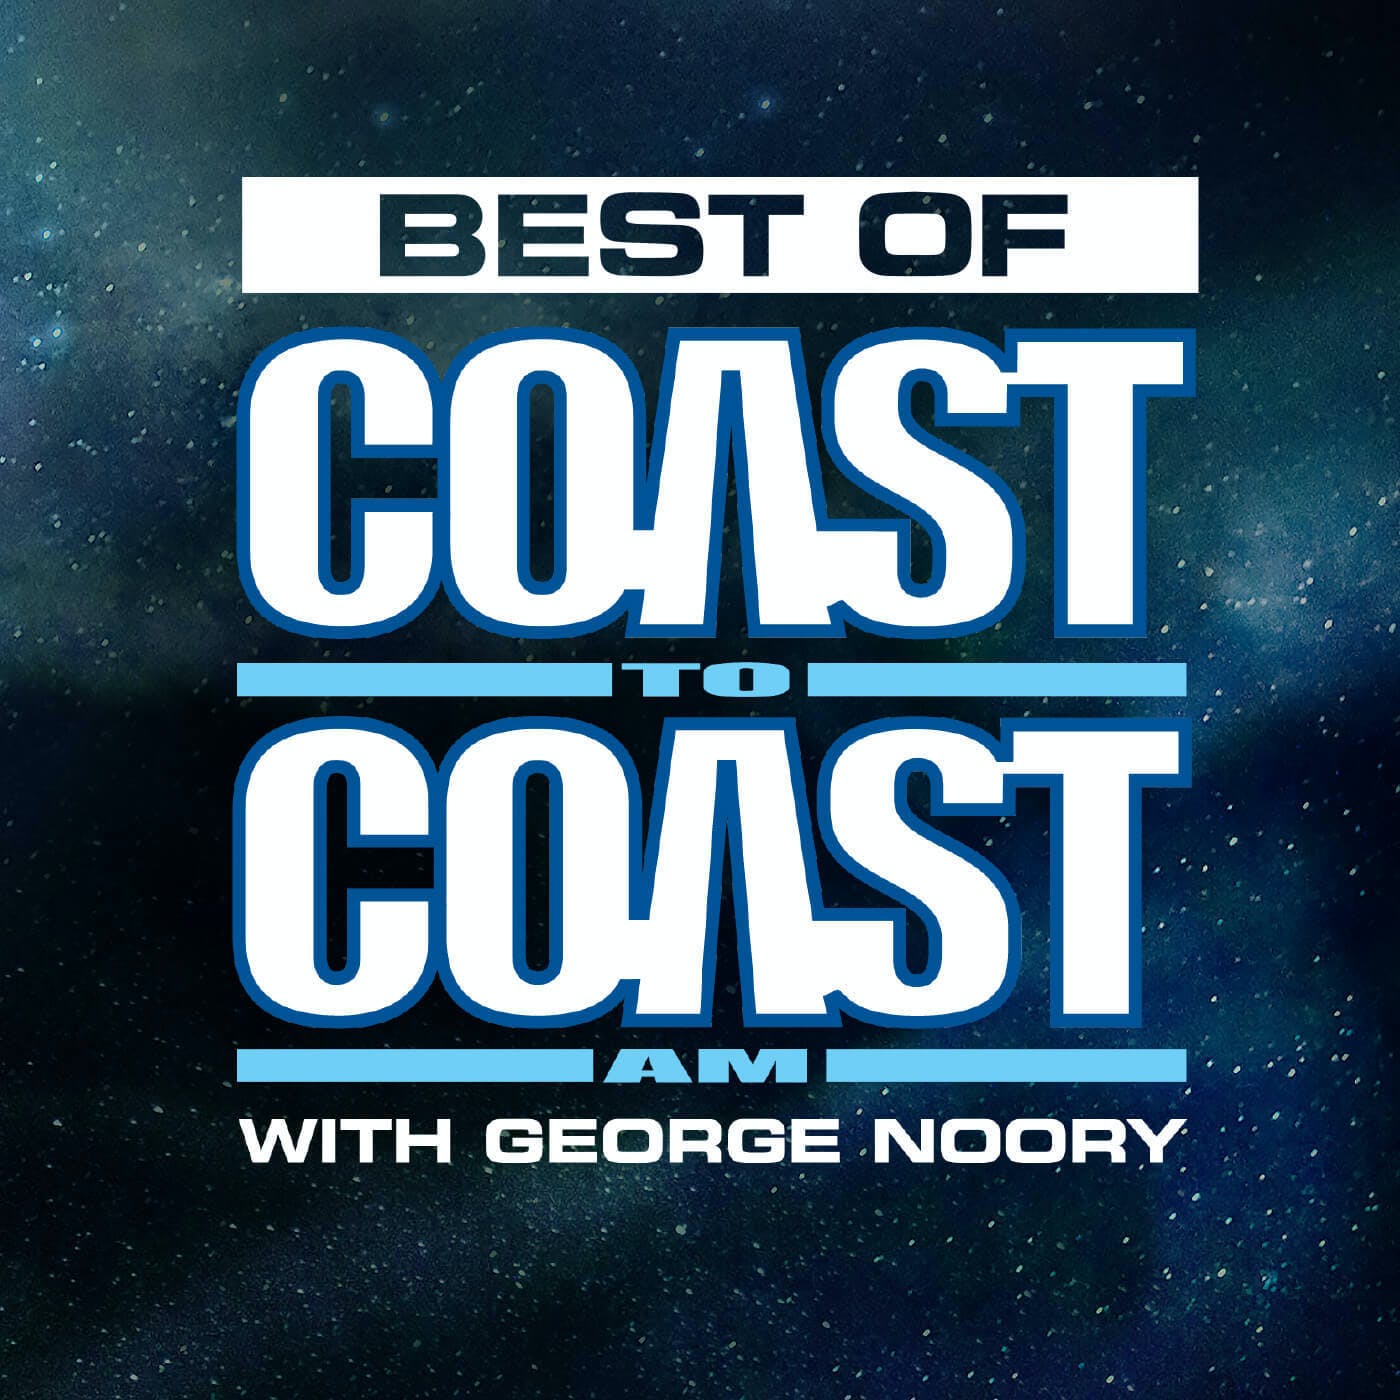 Terry Carnation - Best of Coast to Coast AM - 4/16/21